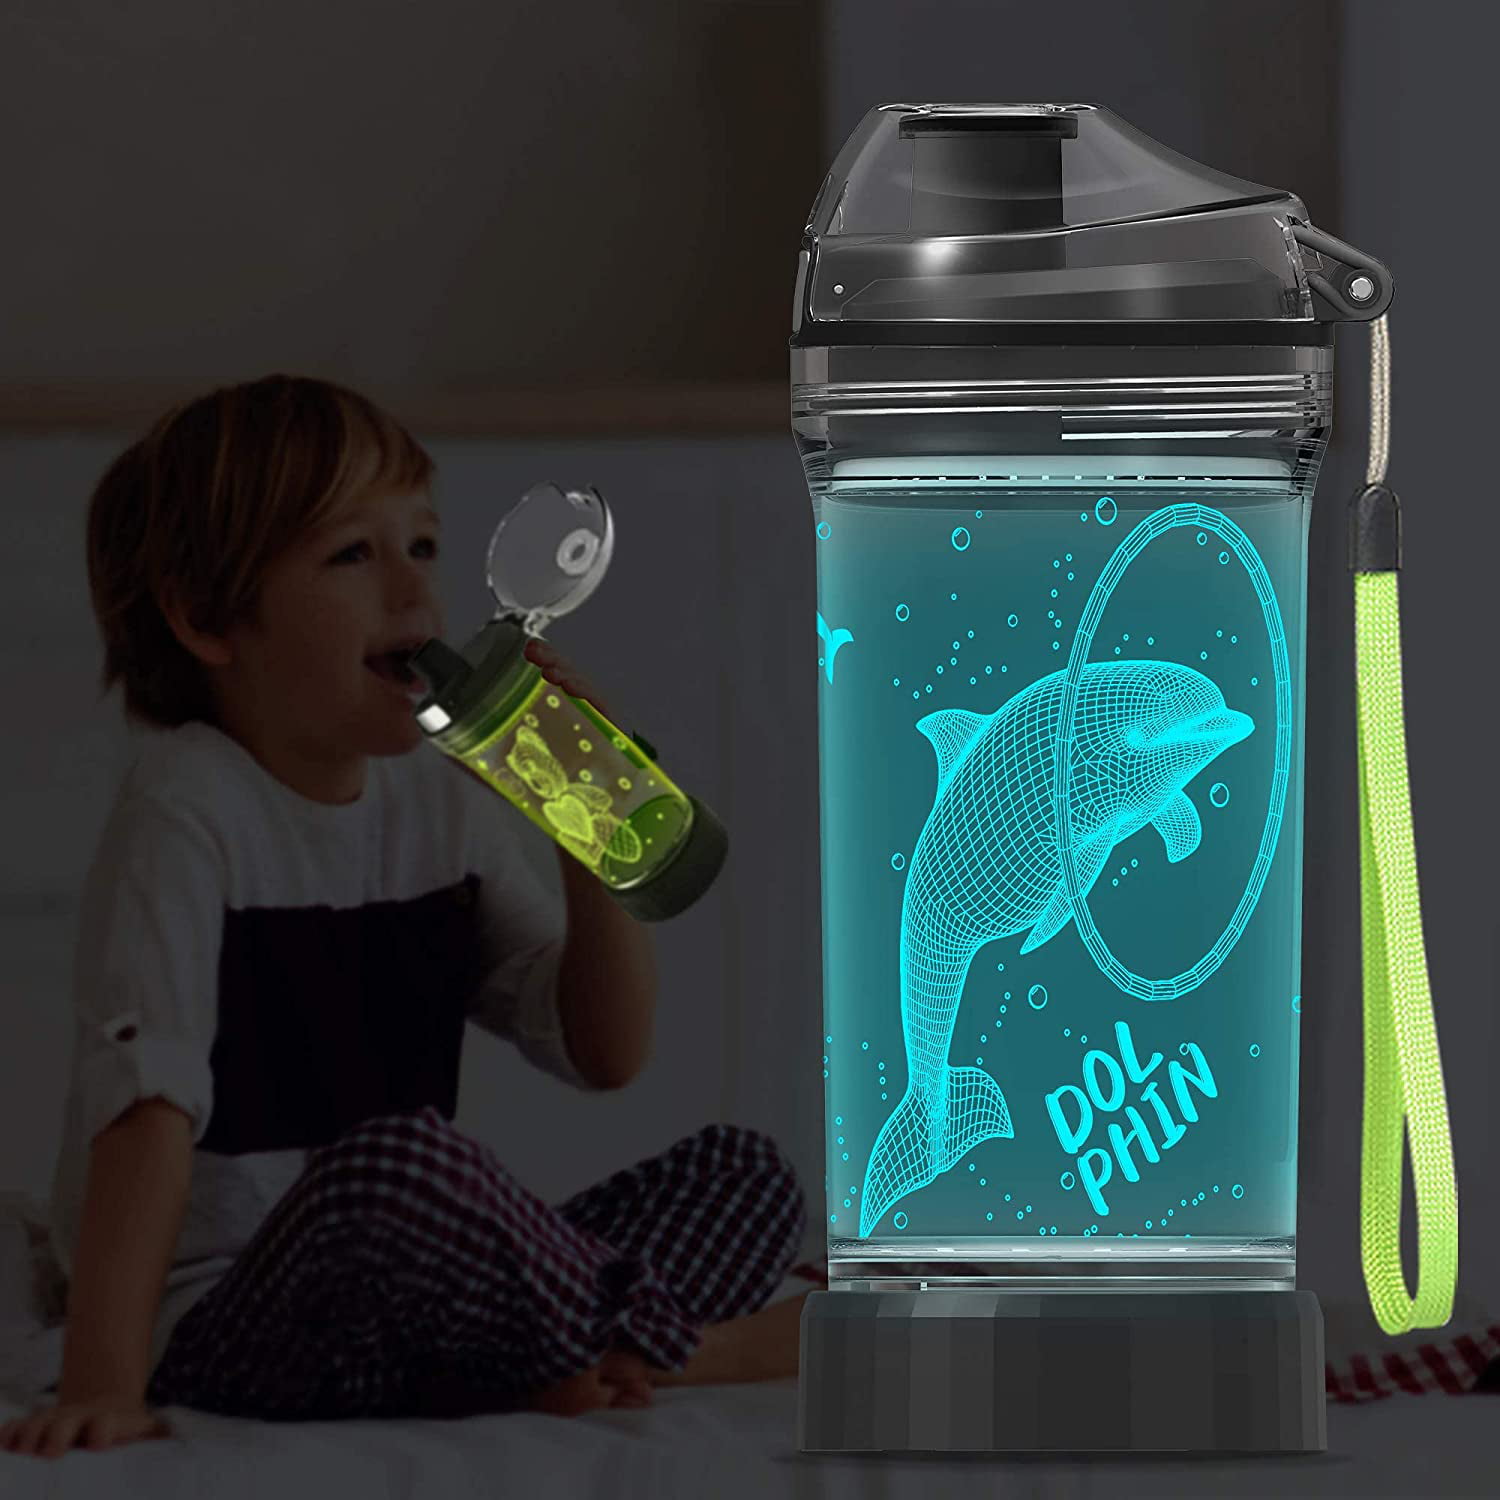 Light Up Kids Water Bottle with 3D Ocean Animal Porpoise Design 14 OZ Tritan BPA Free Eco-Friendly Cool Drinking Cups Gift for School Kids Boy Girl Child Women Christmas Holiday Dolphin Gifts 